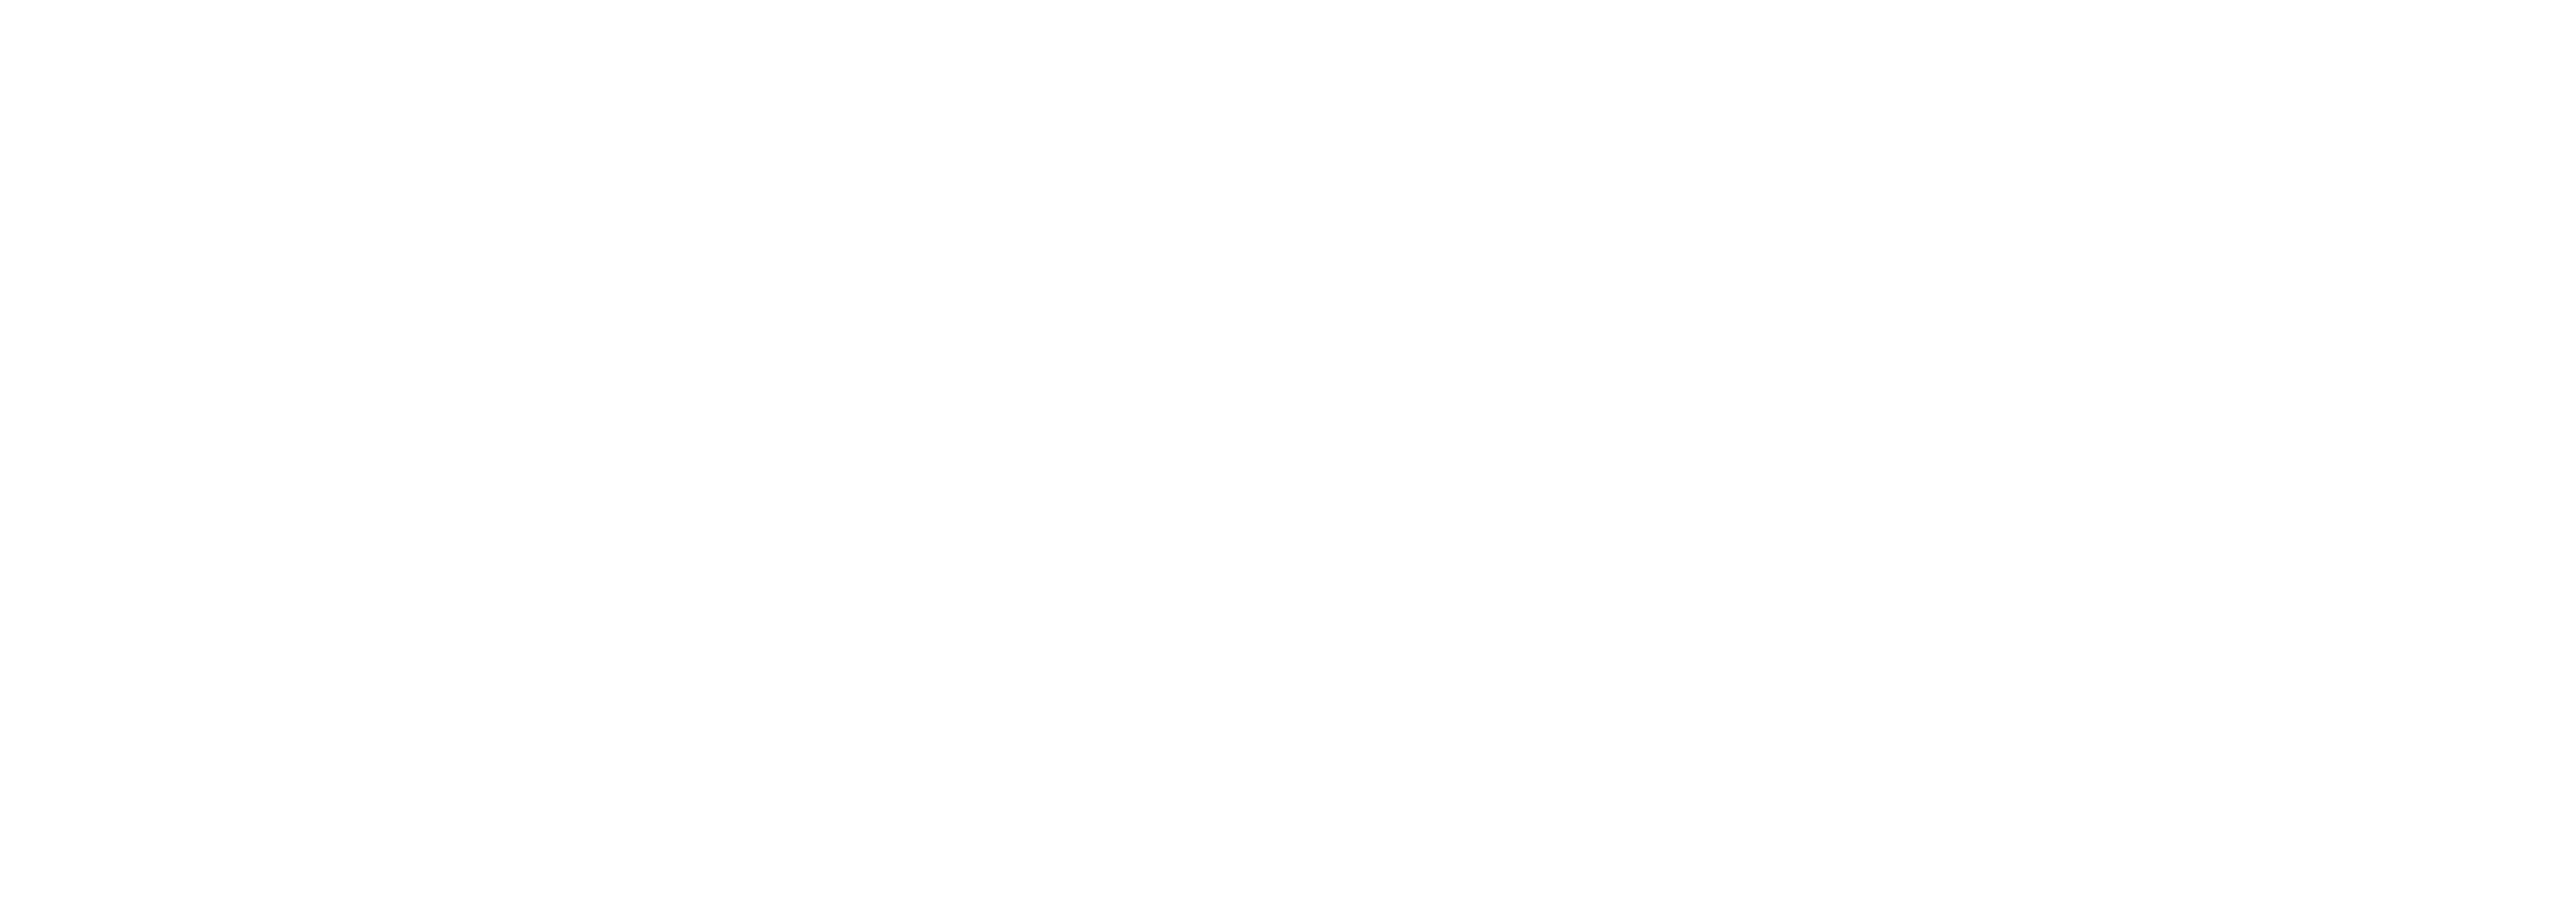 Awaked - The best coffee delivered to your door!